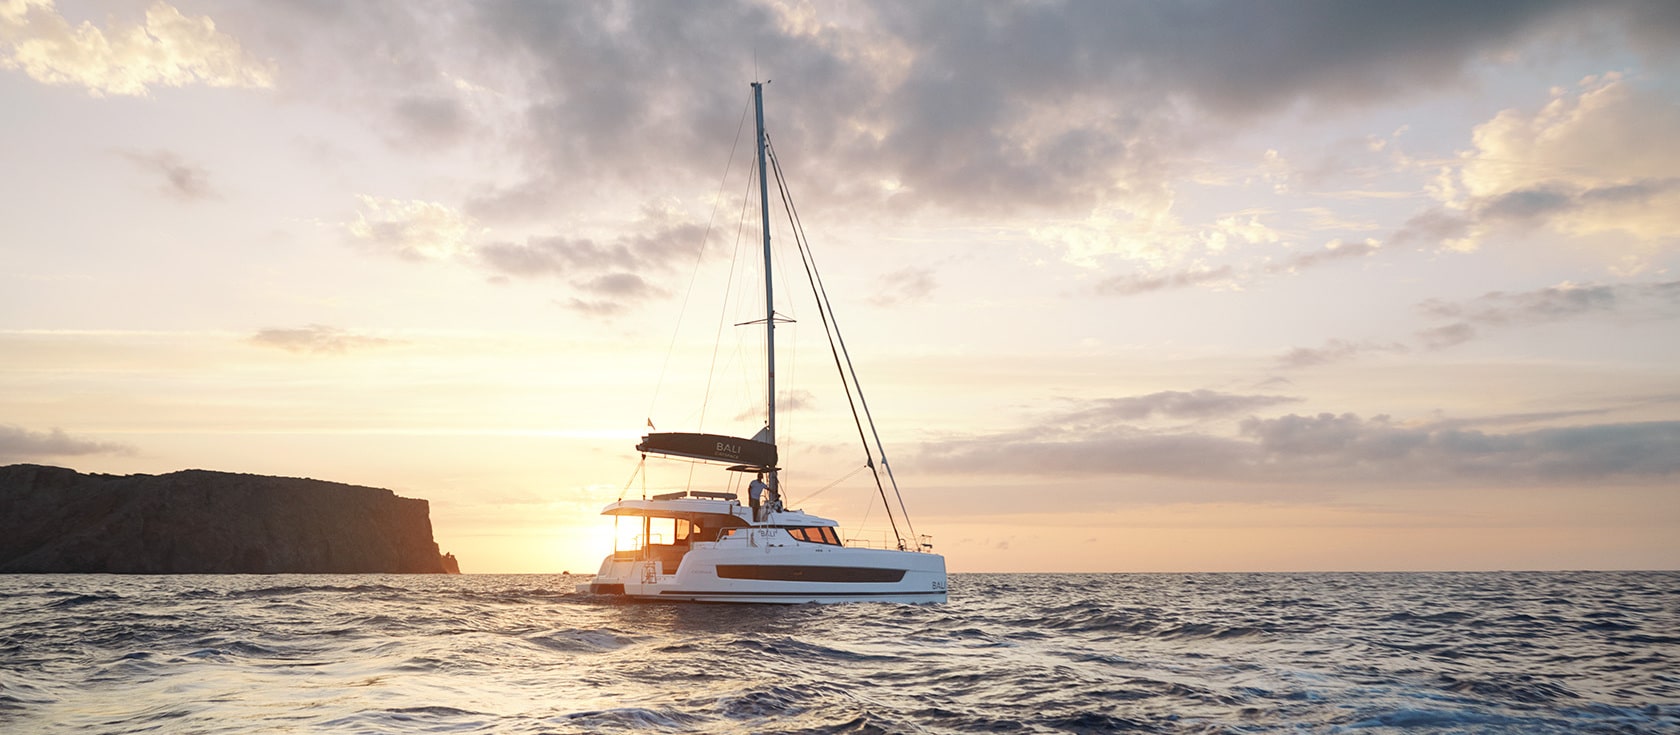 Sunset Sailing Around Treasure Island: Your Guide to Choosing the Perfect Boat